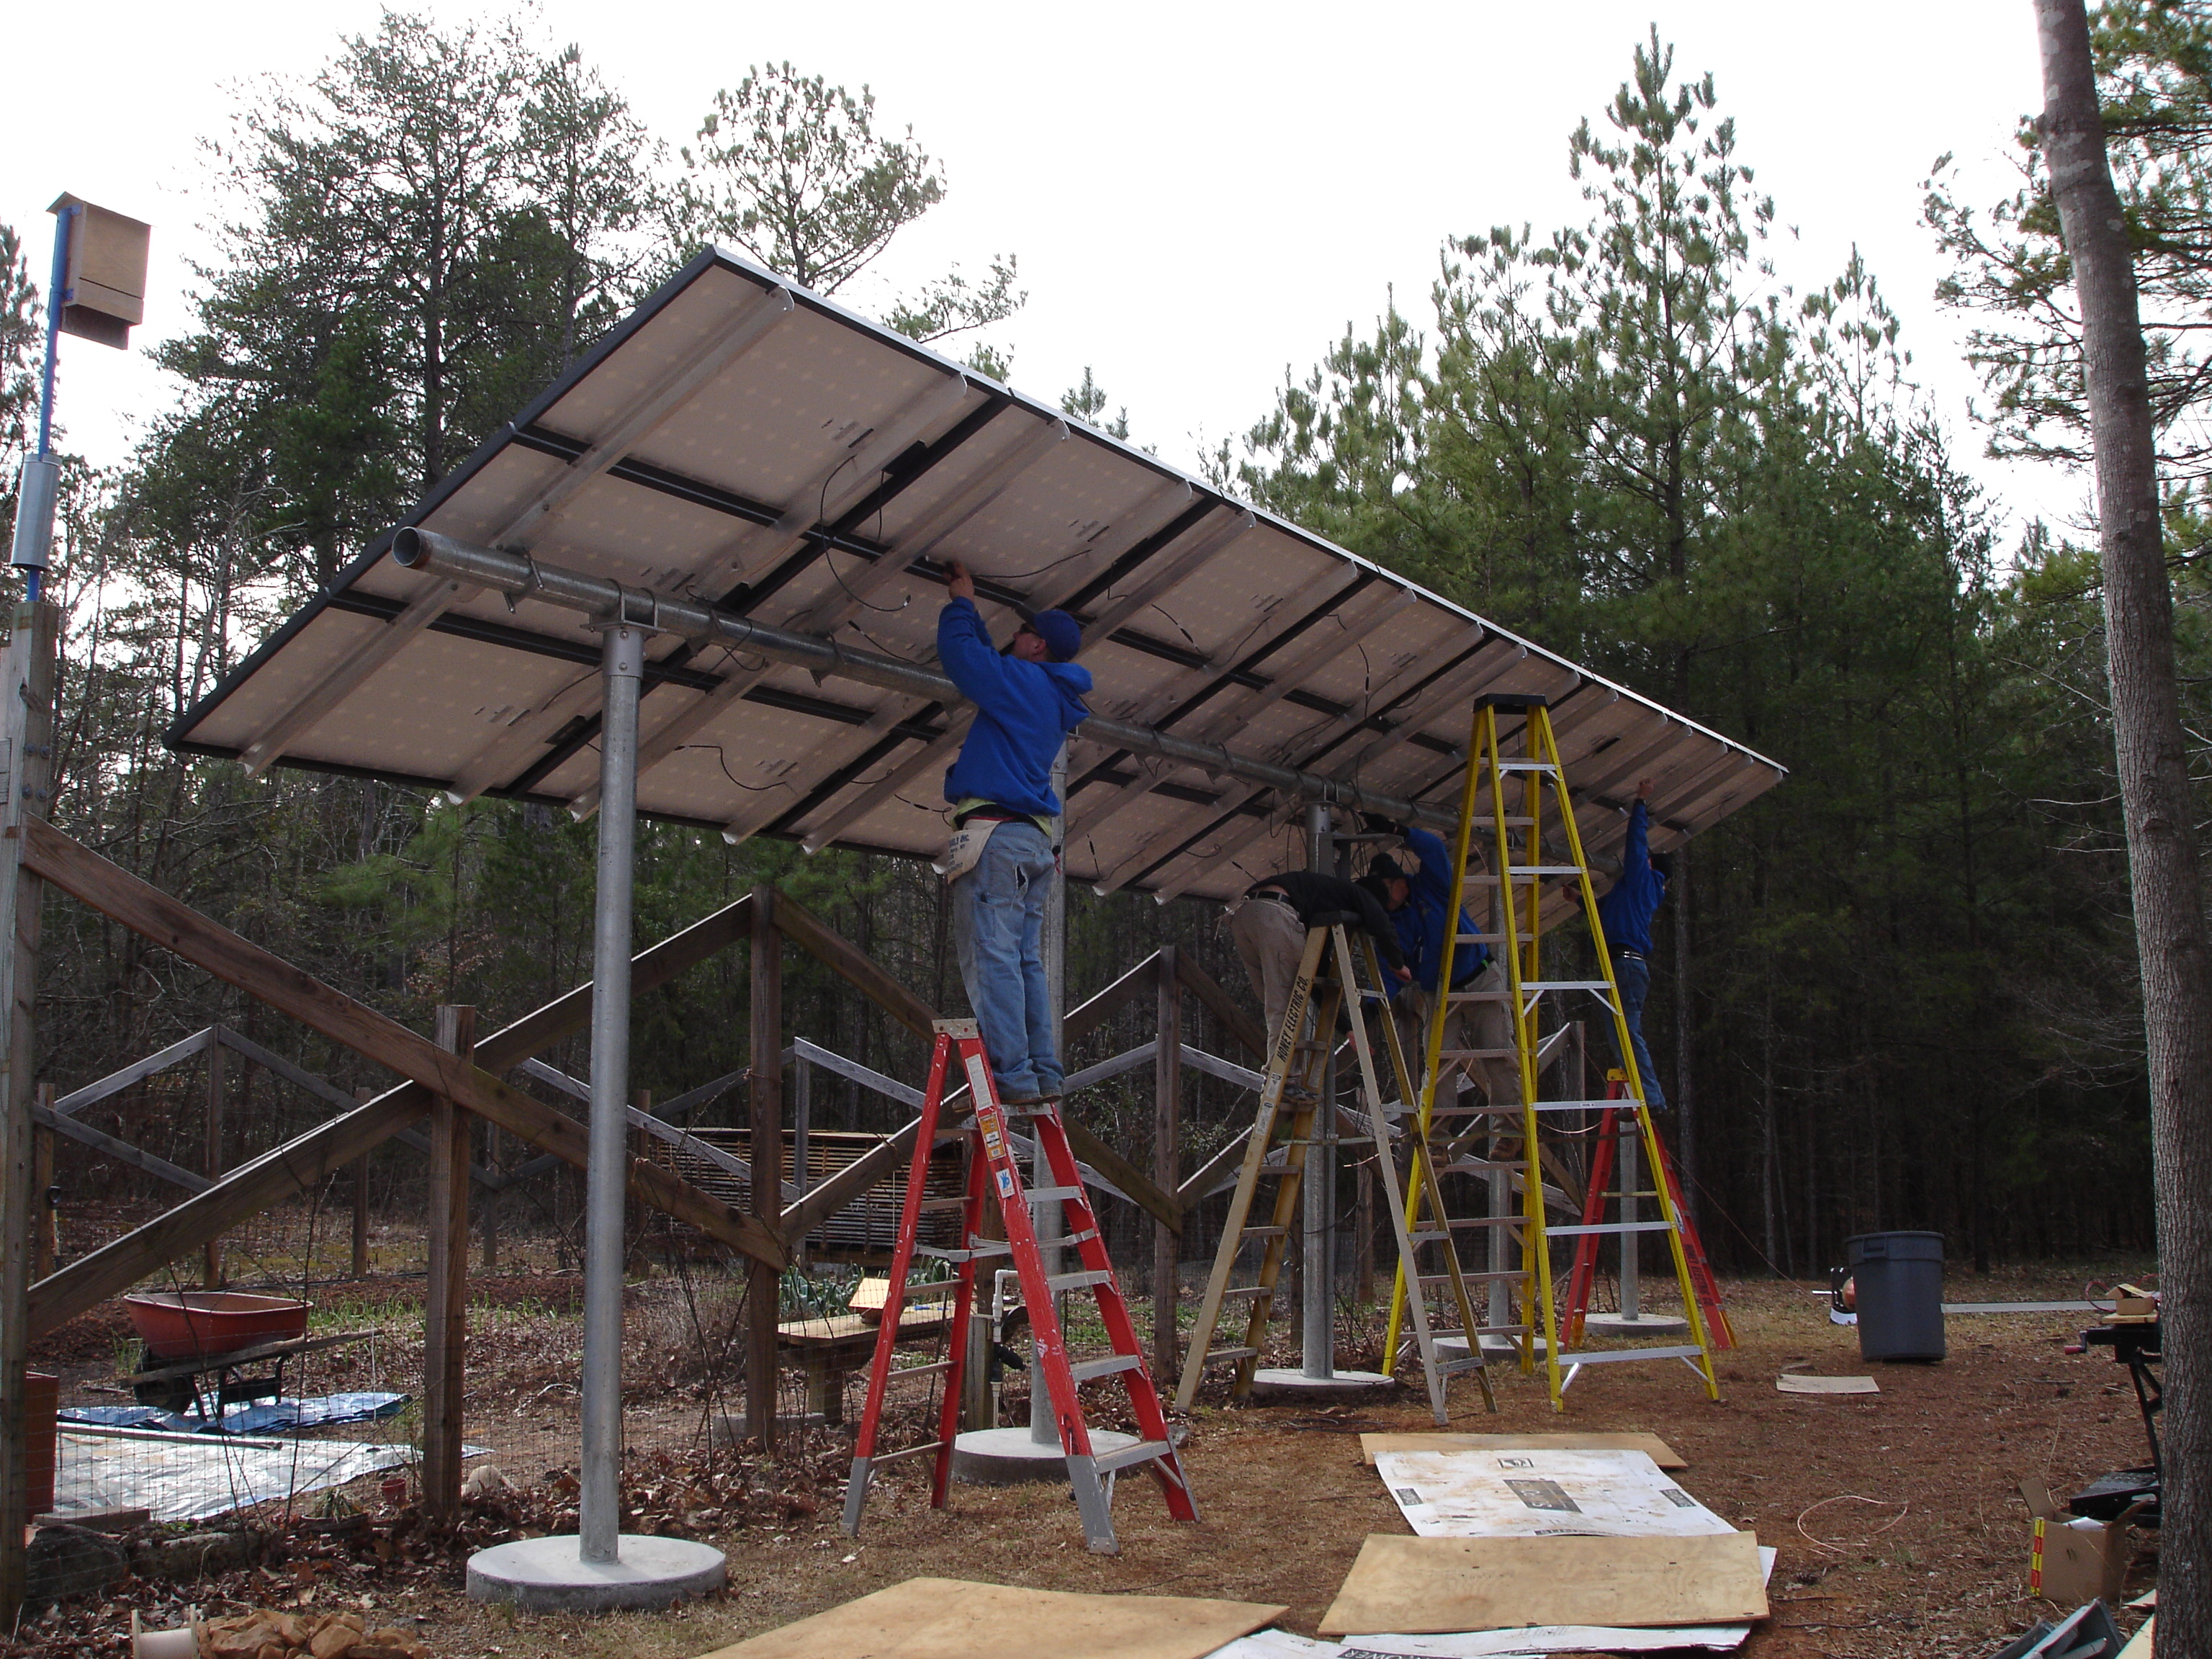 Installing photovoltaic panels onto the structure.